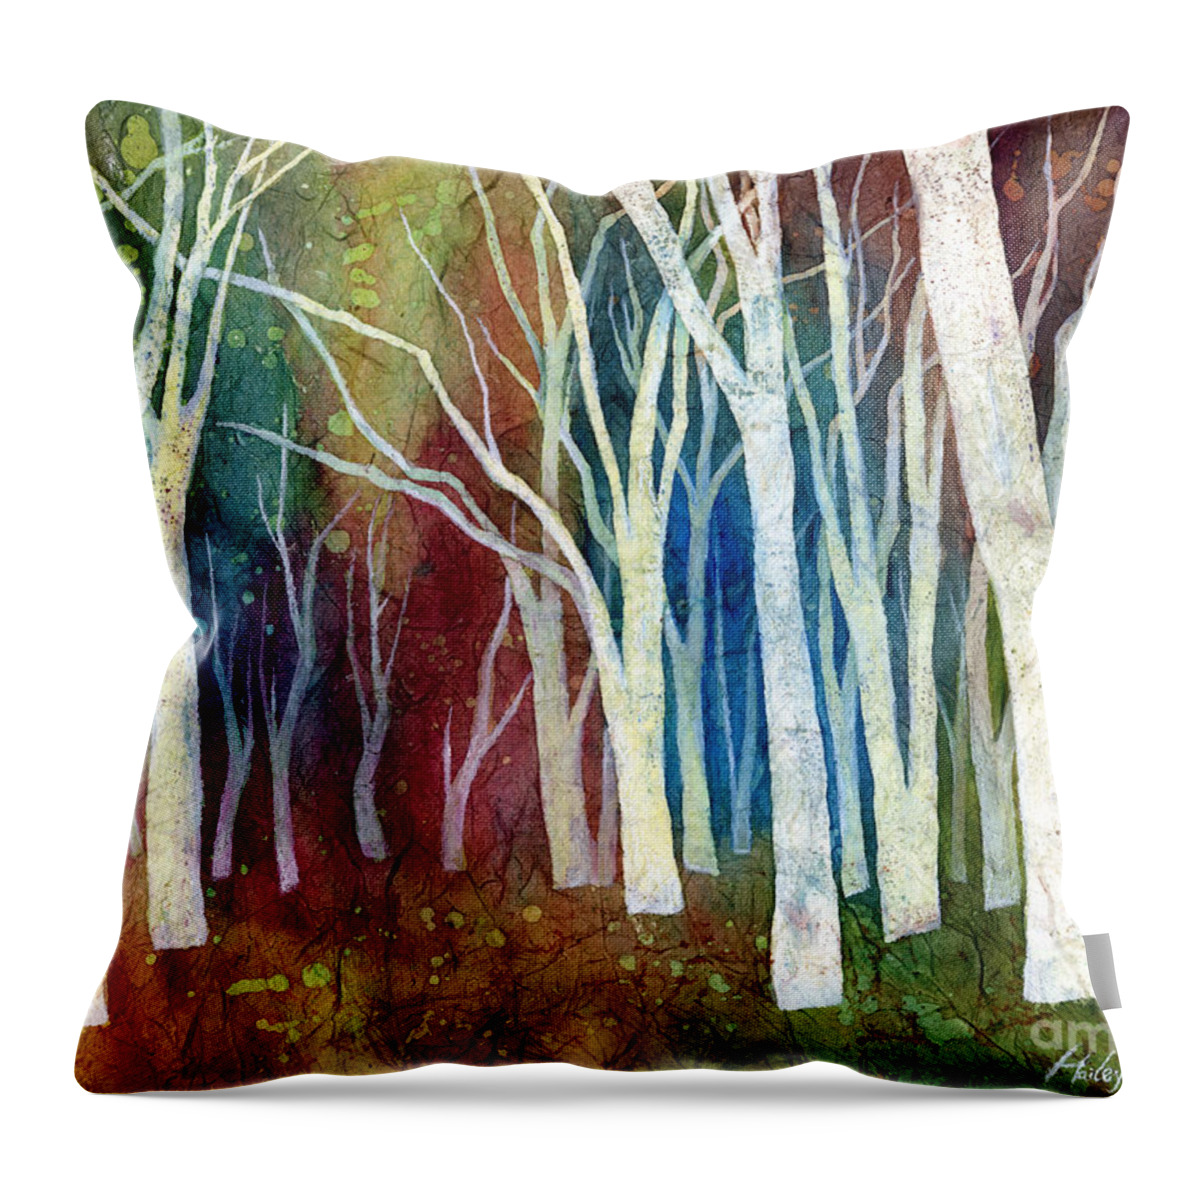 White Forest Throw Pillow featuring the painting White Forest I by Hailey E Herrera